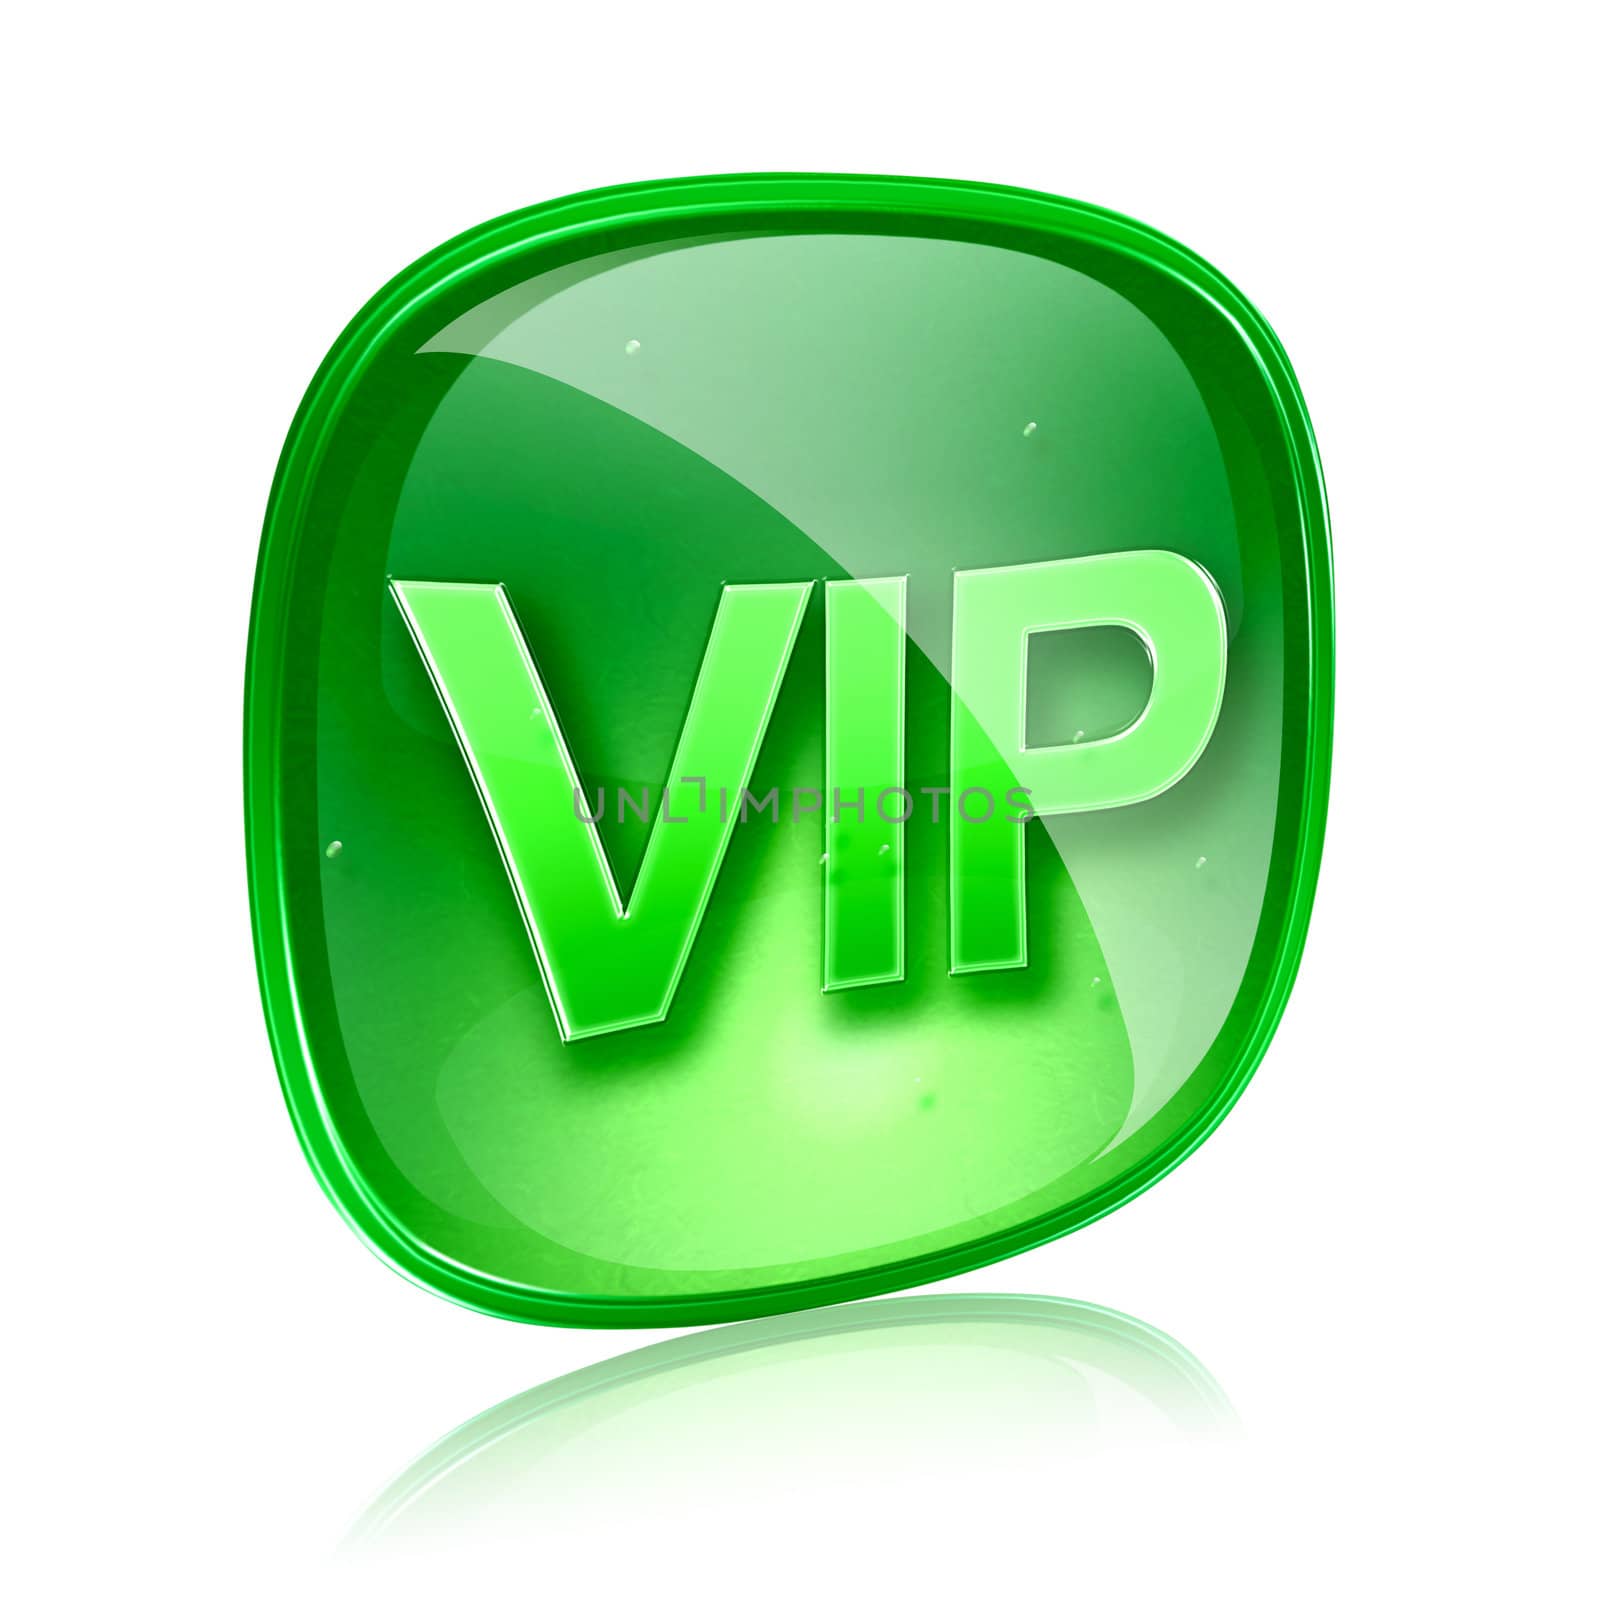 VIP icon green glass, isolated on white background. by zeffss